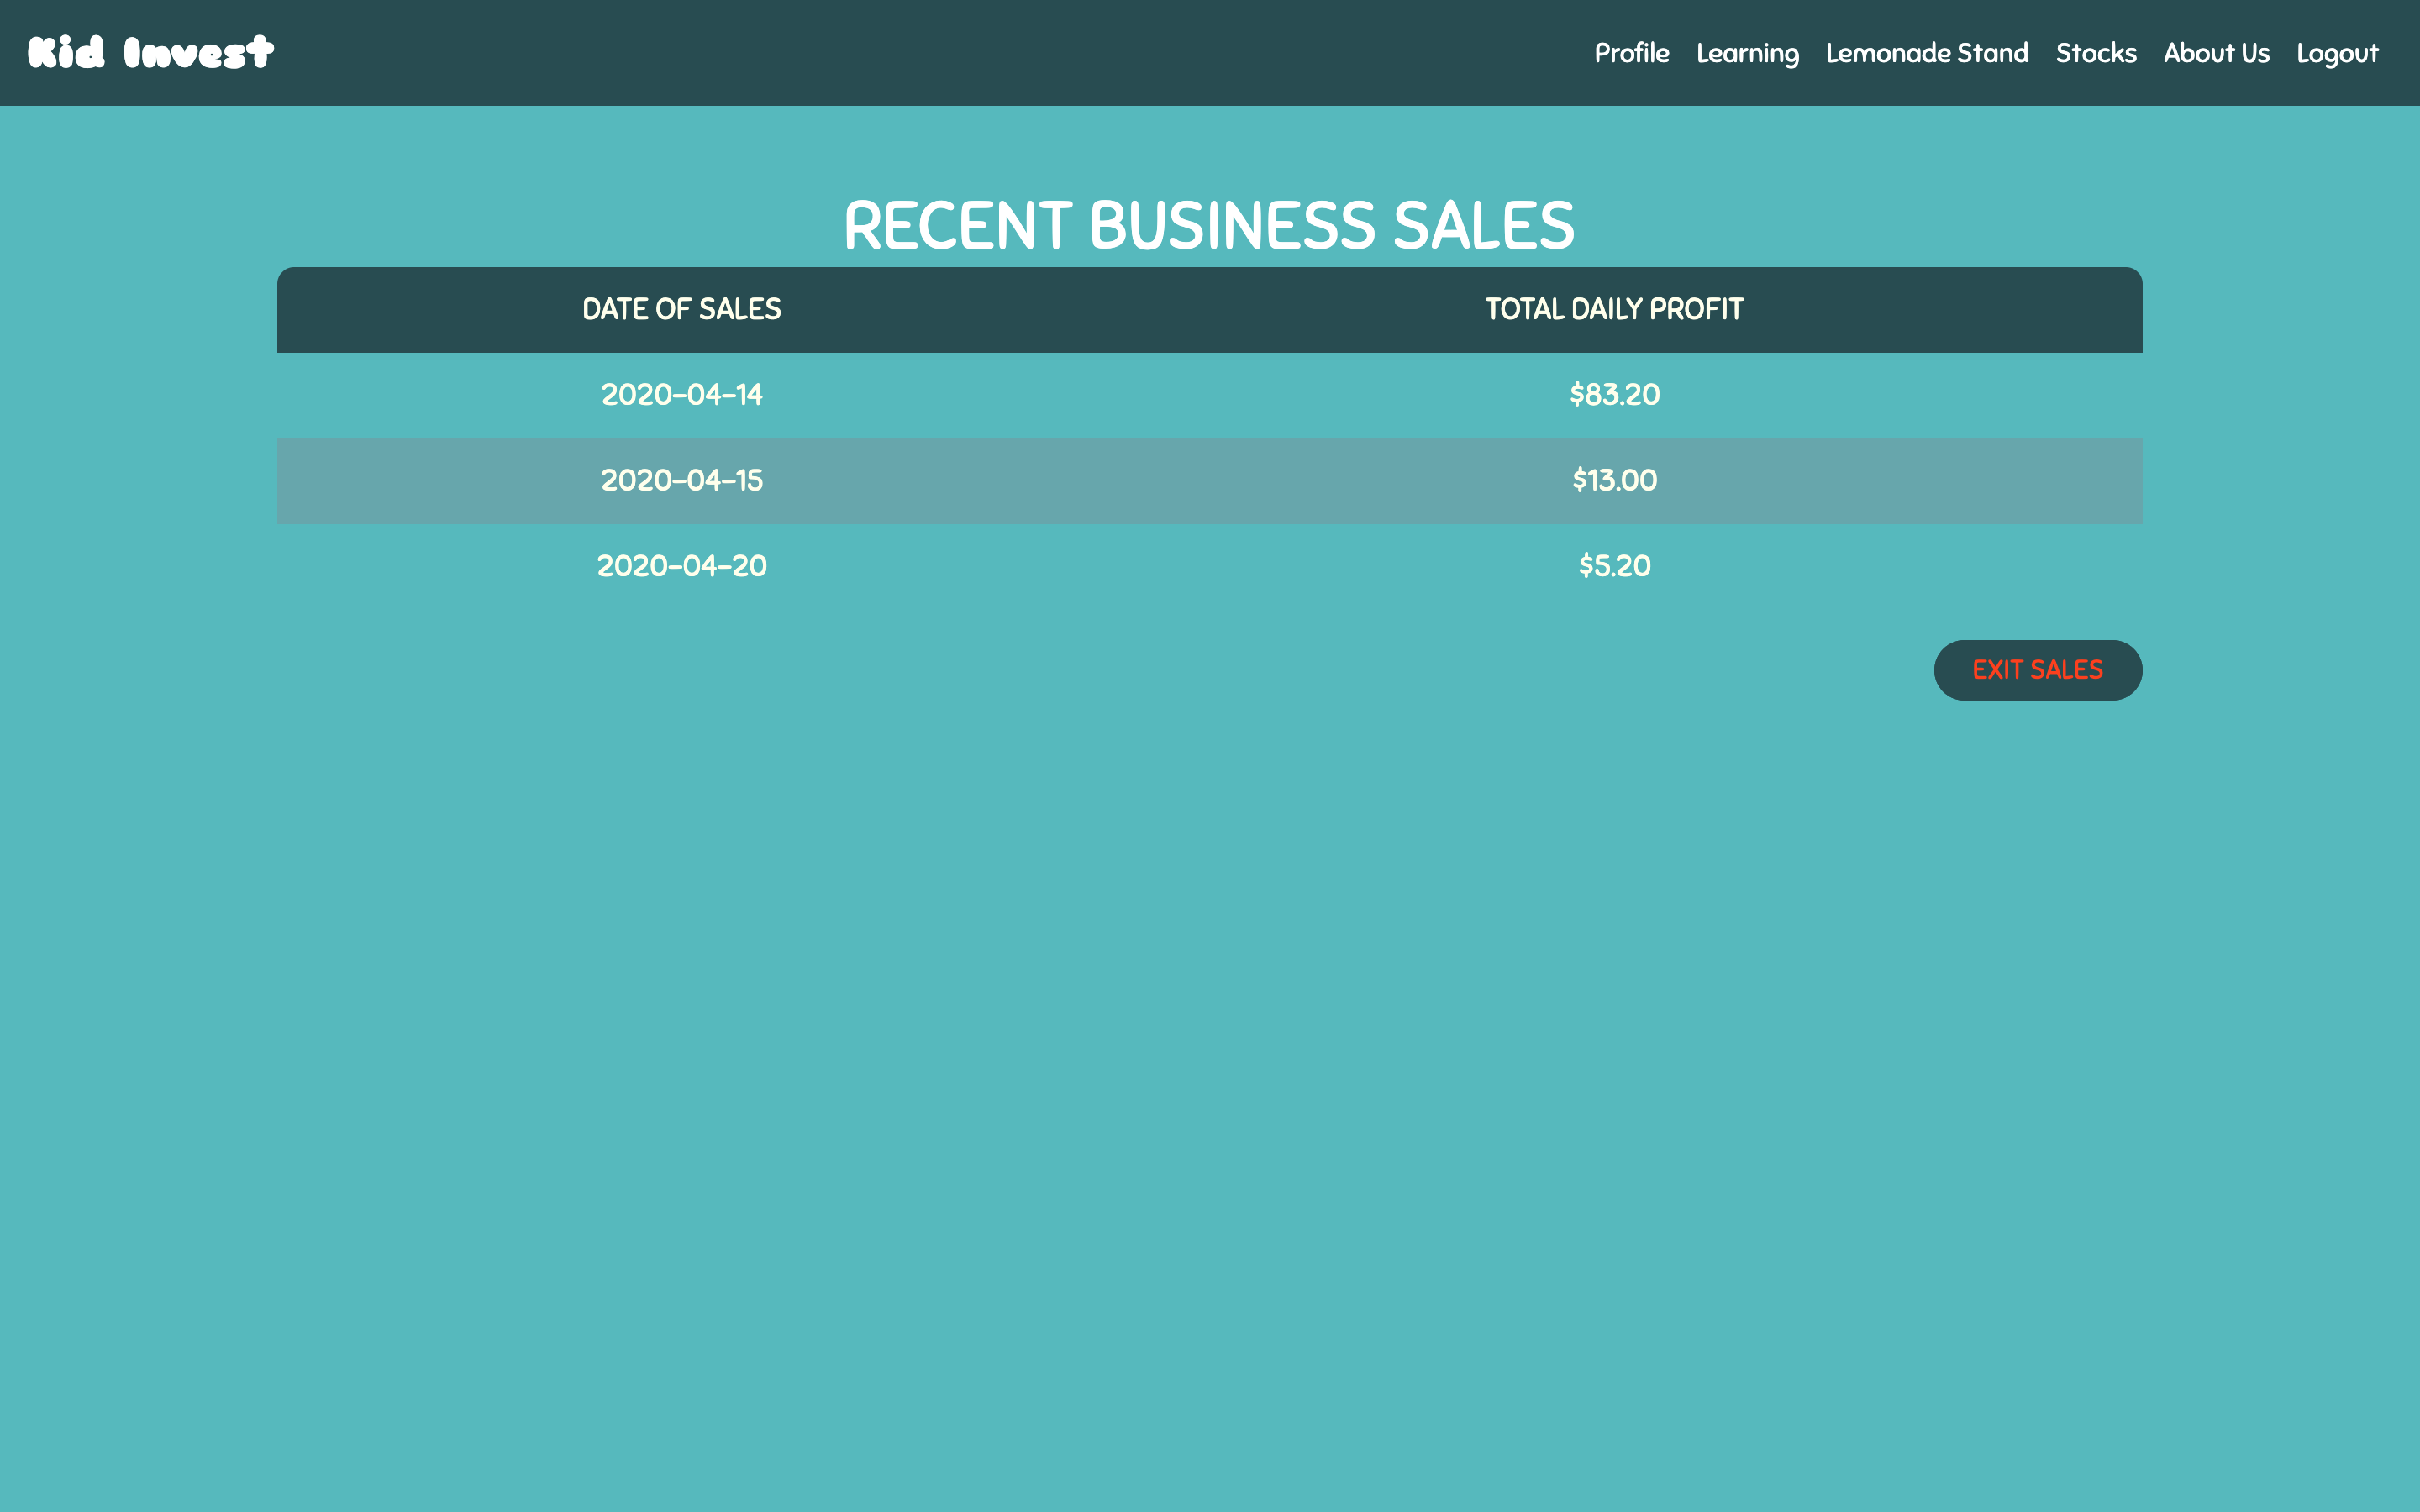 sales page